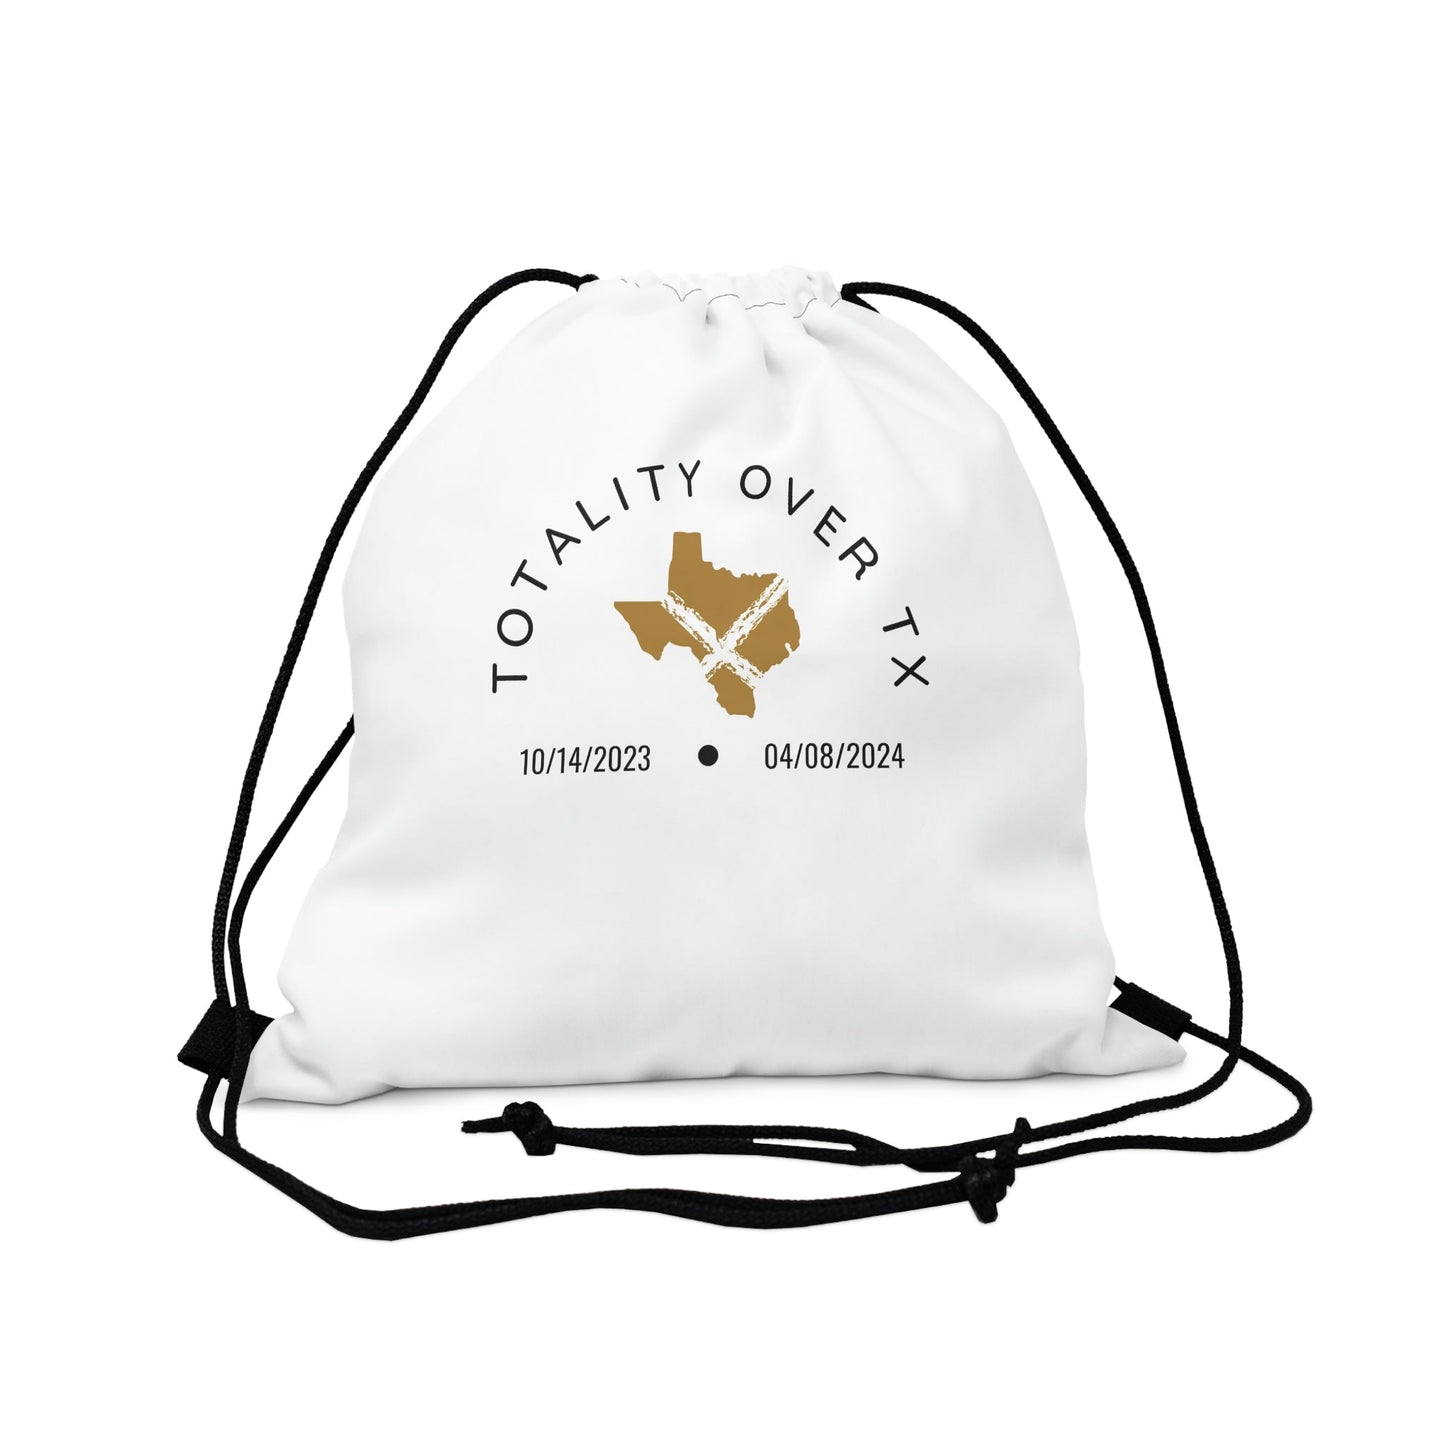 Totality Over TX  Outdoor Drawstring Bag for Both Eclipses